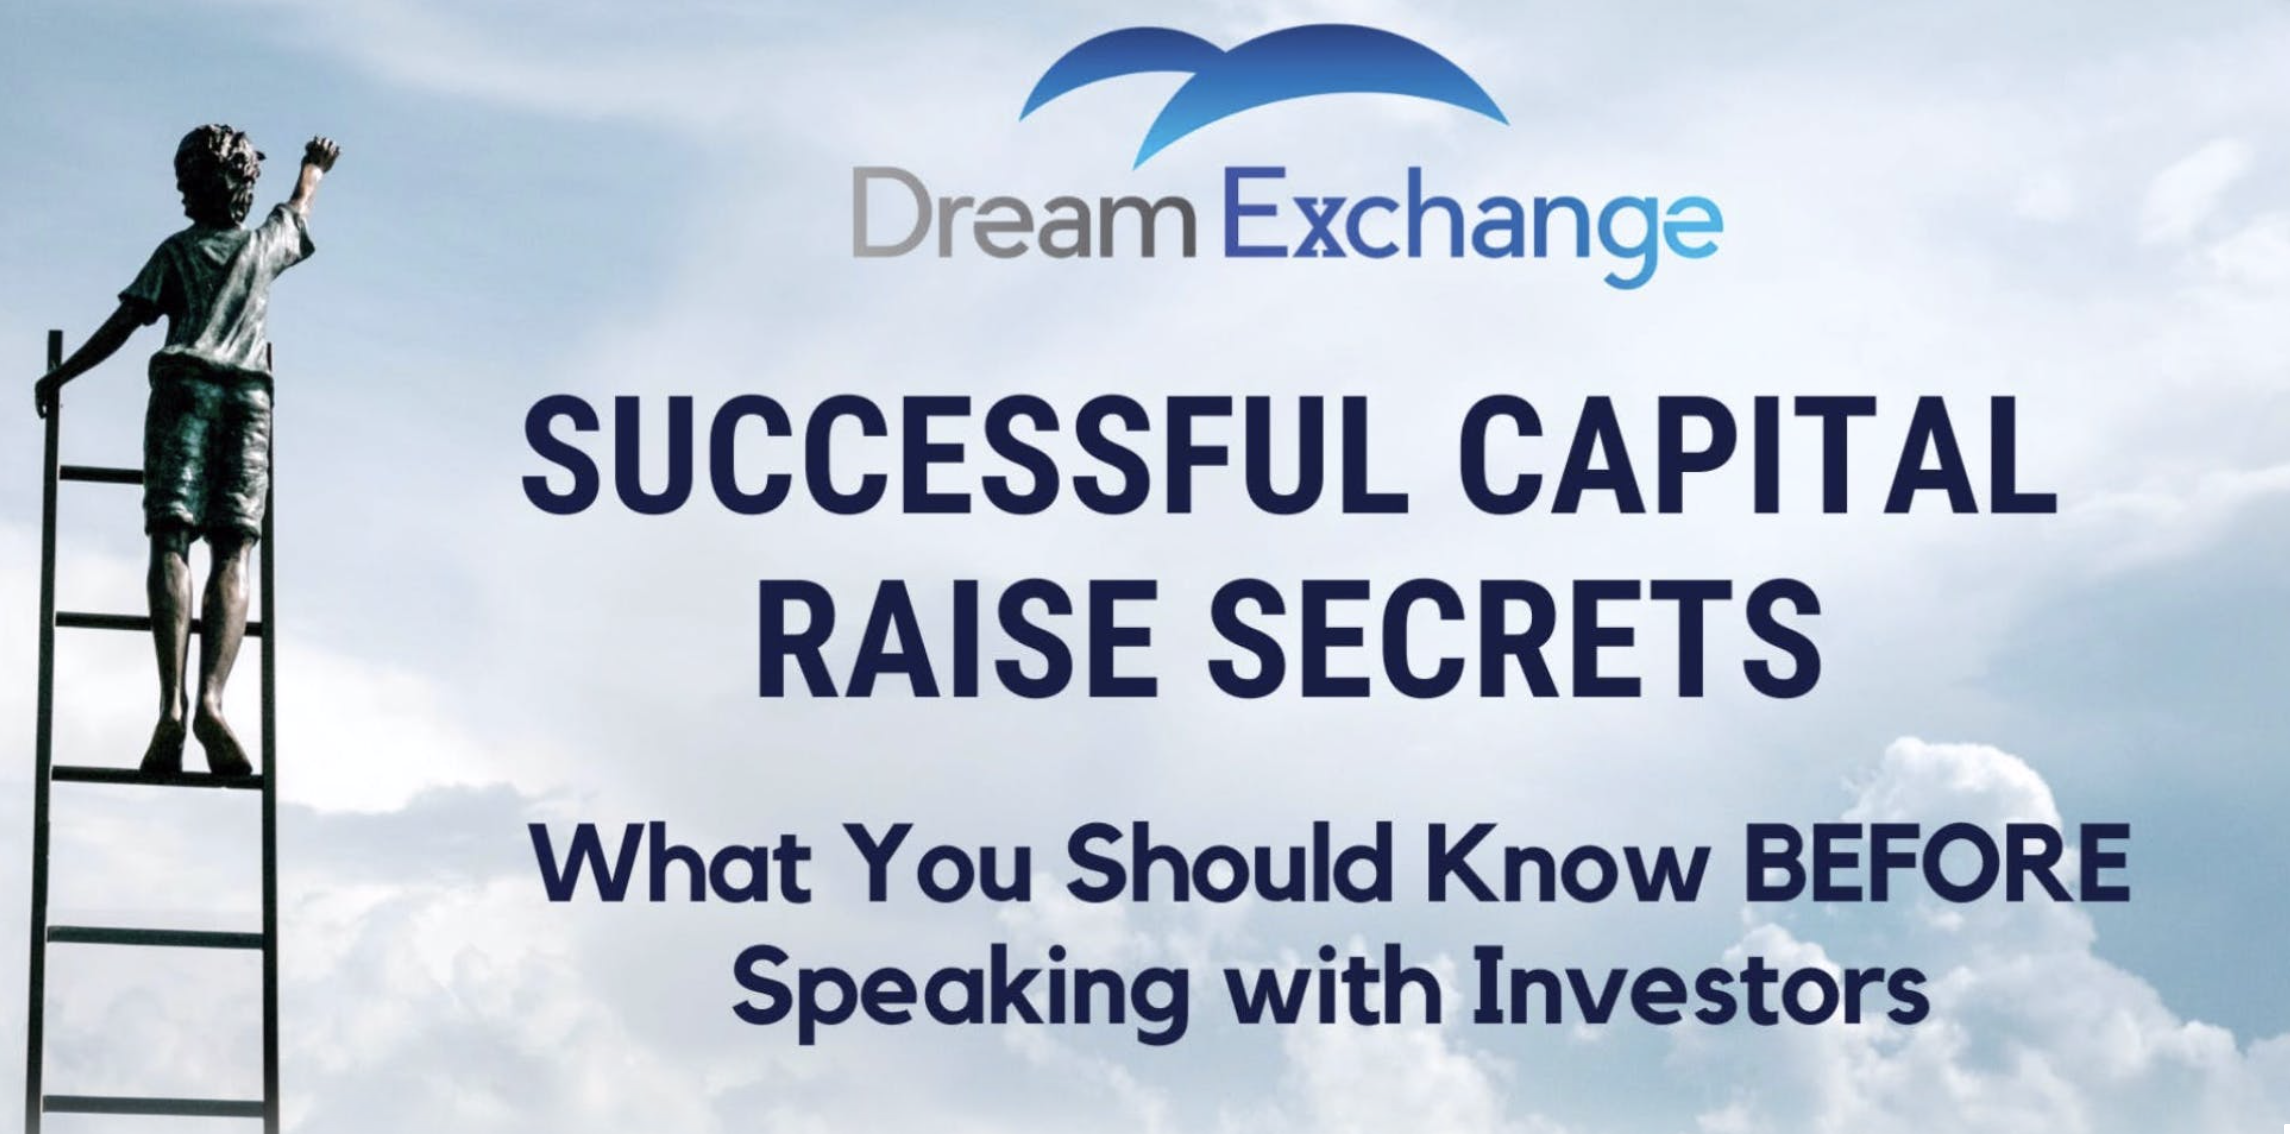 Successful Capital Raise: What You Should Know Before Speaking to Investors